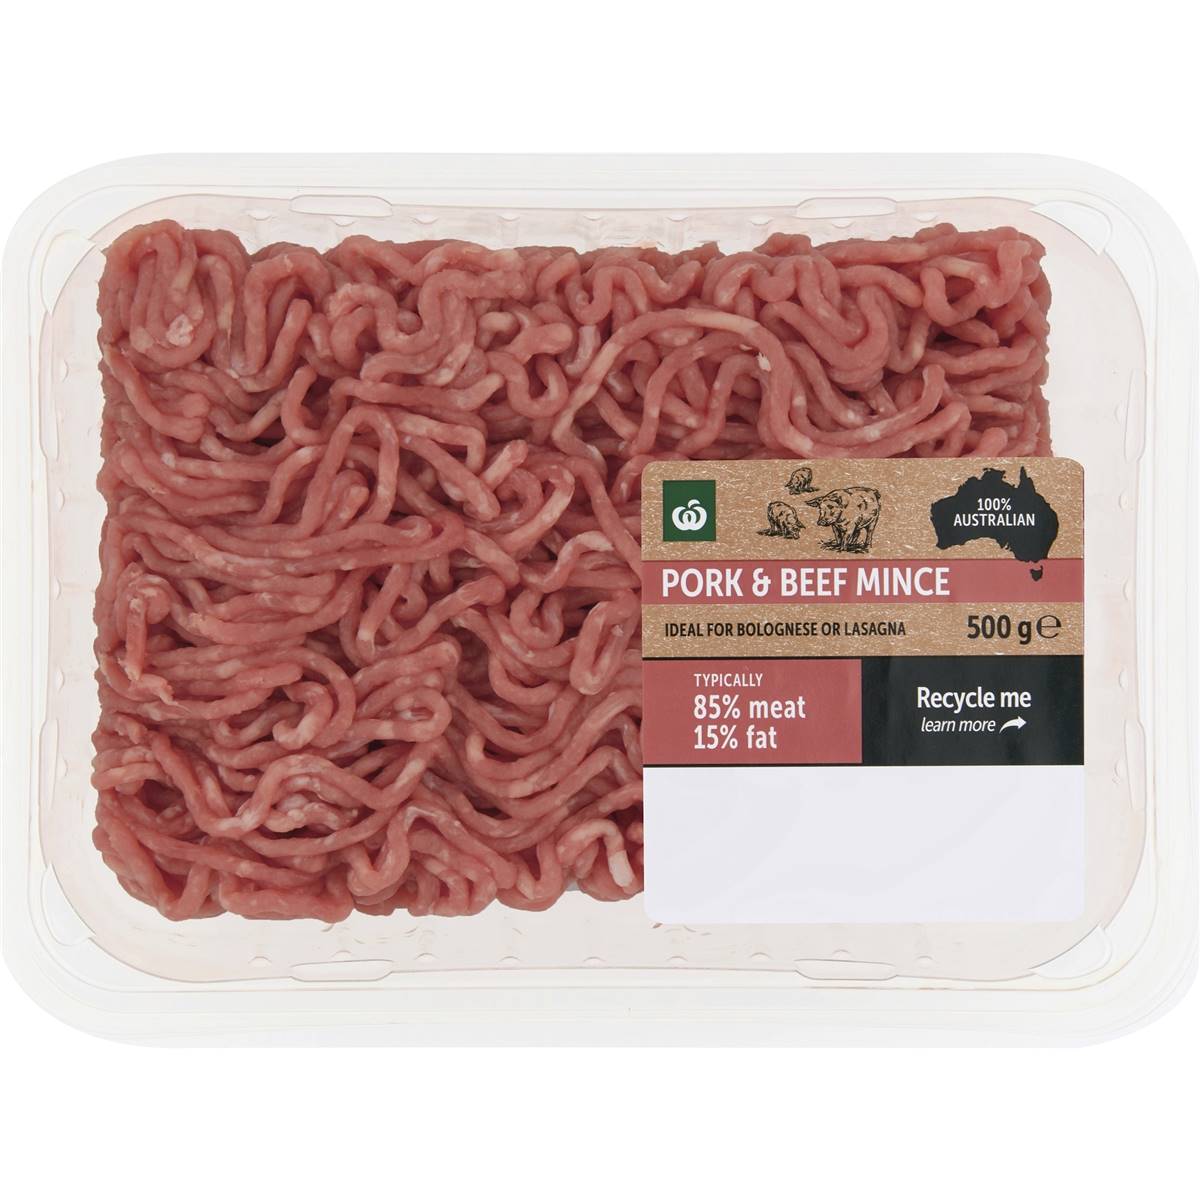 Calories in Woolworths Pork & Beef Mince